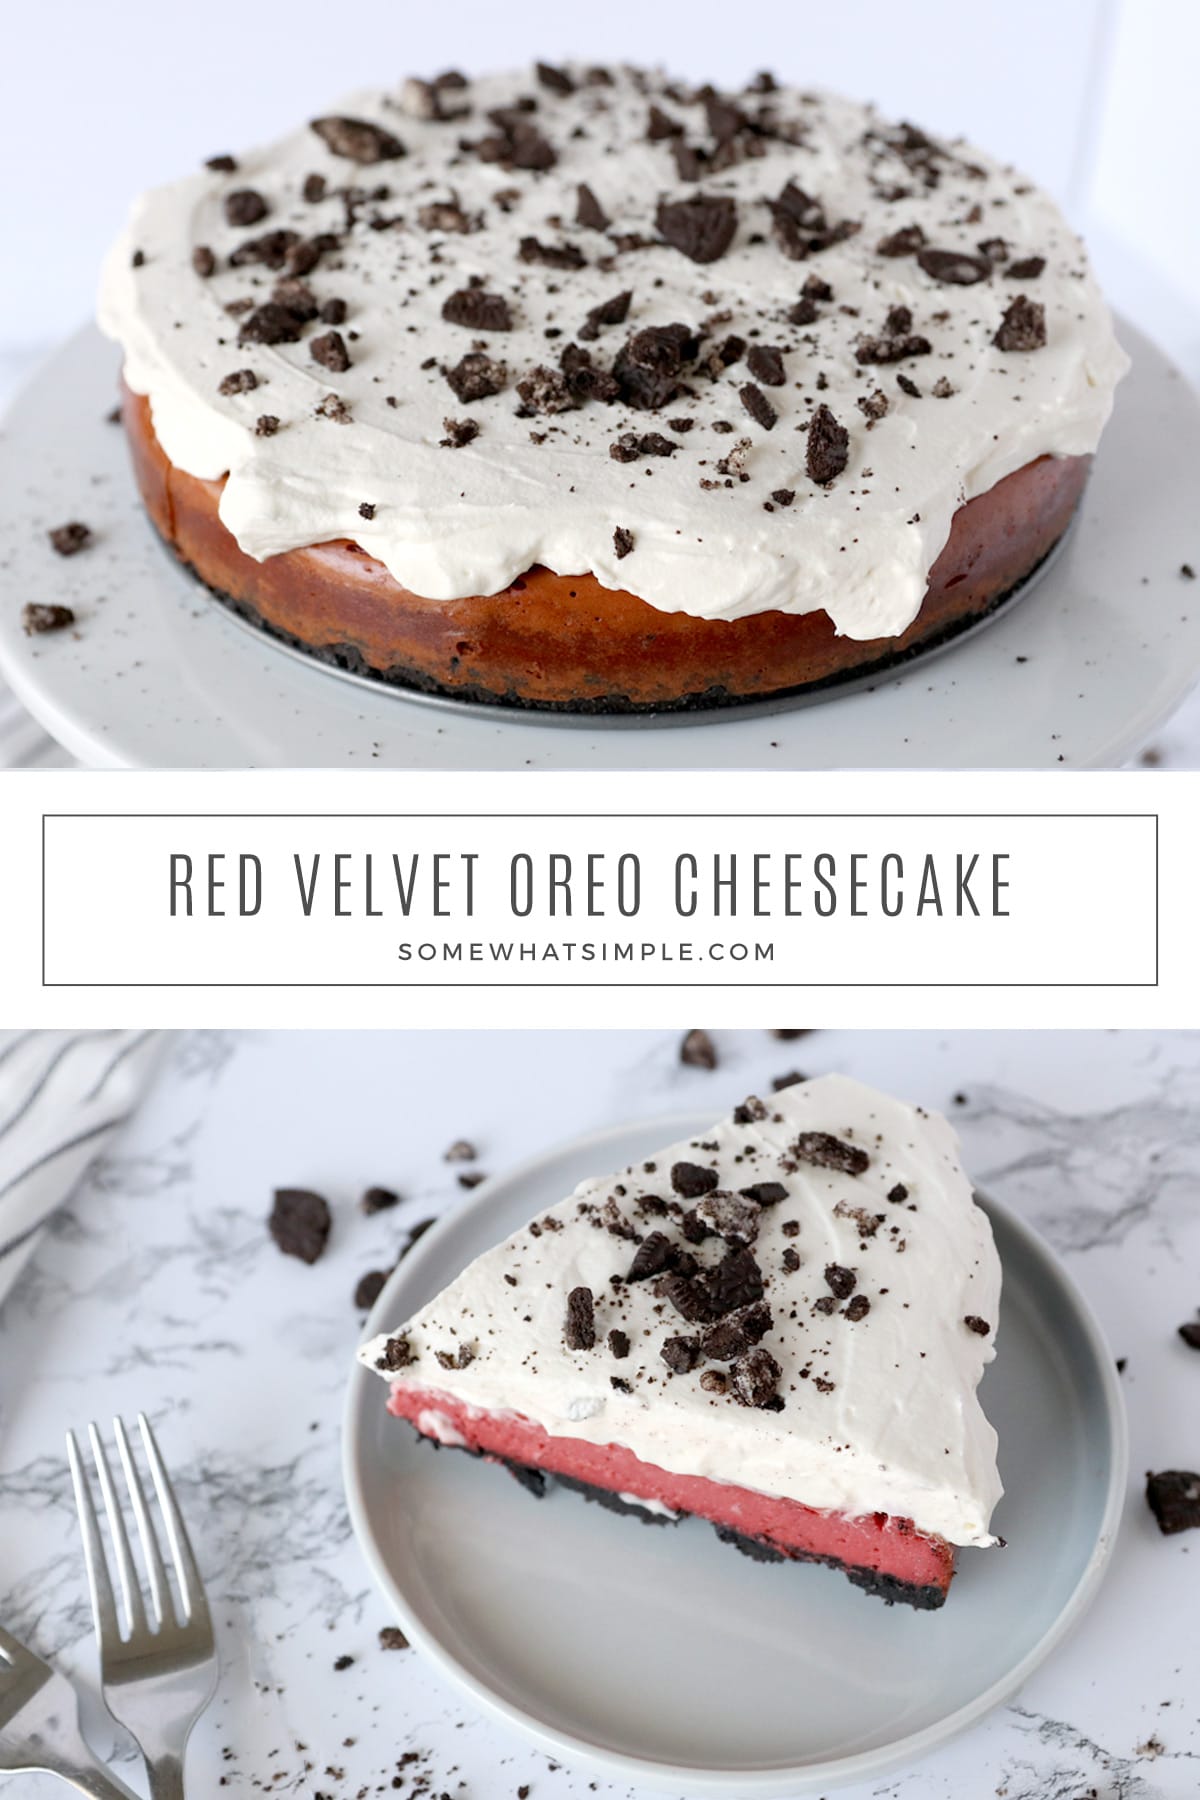 Red velvet cheesecake, an Oreo crust, and creamy whipped cream - this Red Velvet Oreo Cheesecake is easy to make and totally delicious! via @somewhatsimple